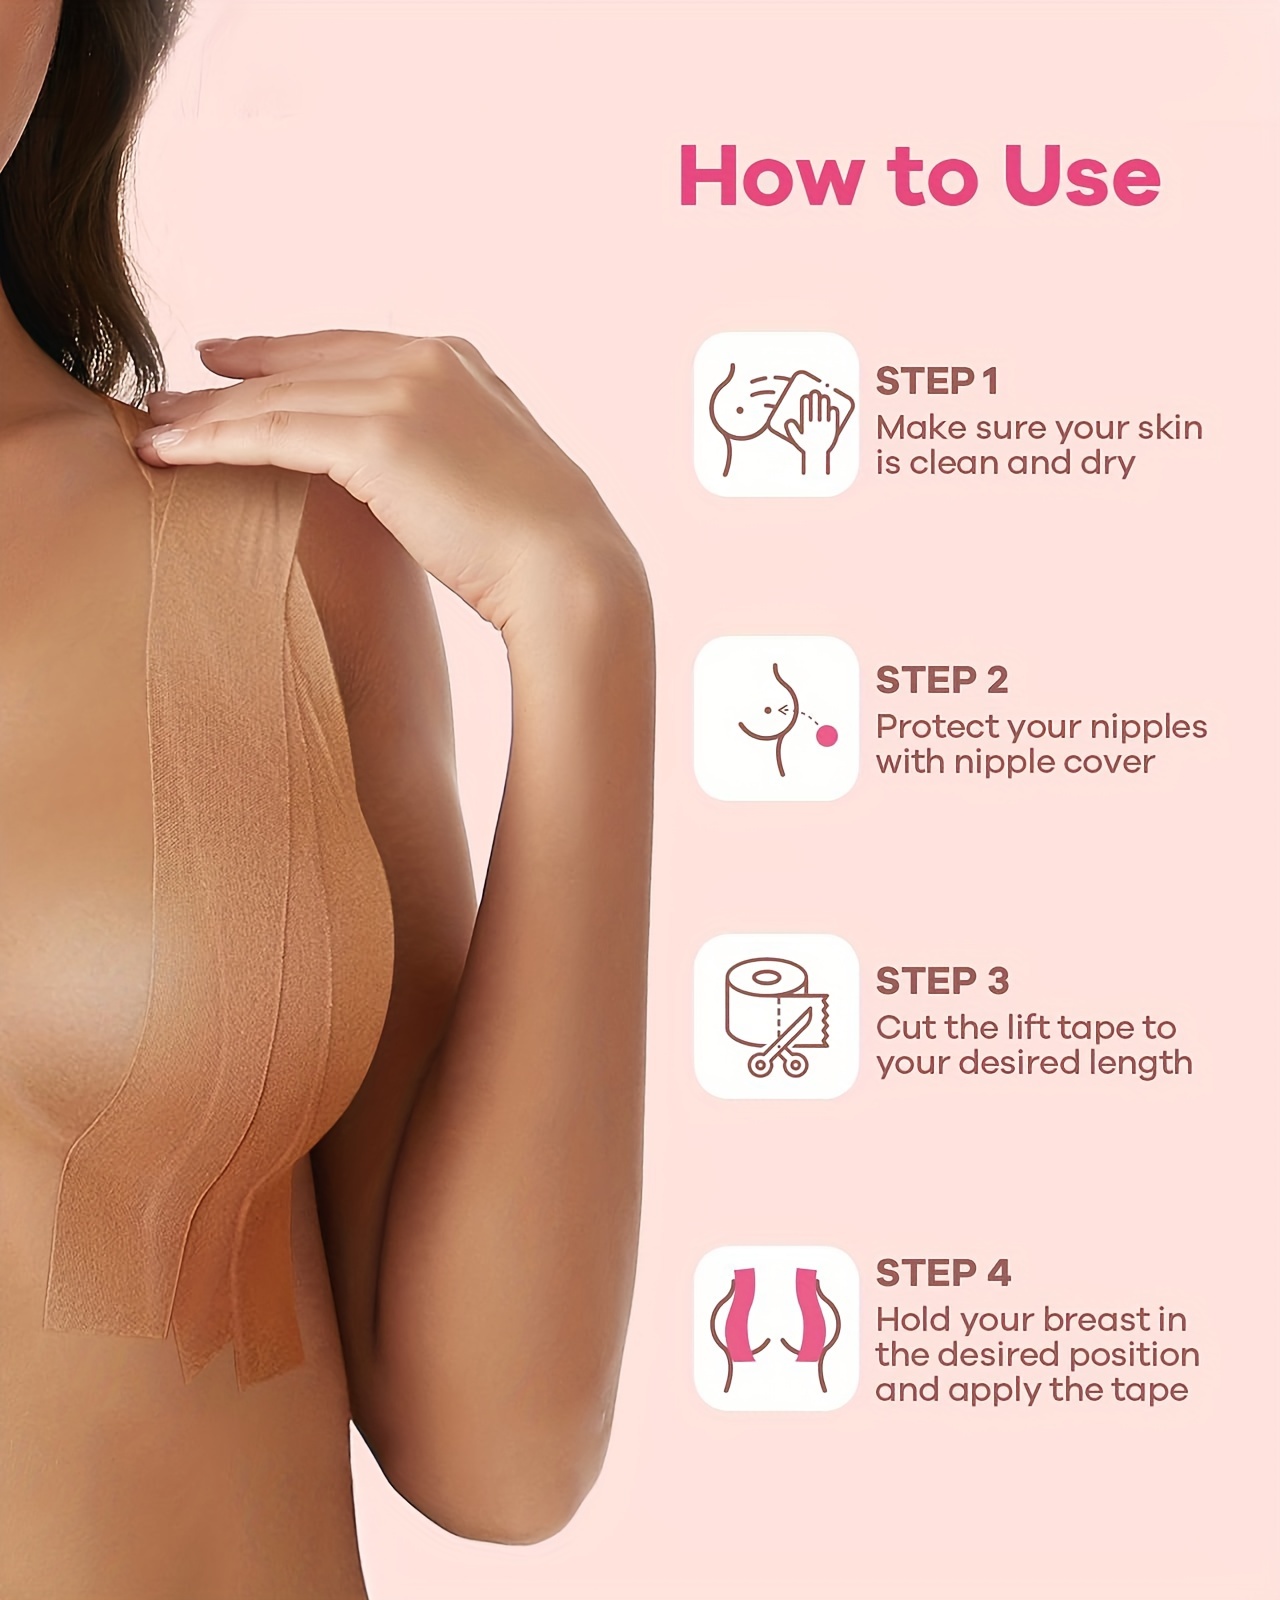 Boob Tape For Breast Lift, Achieve Chest Brace Lift & Contour Of Breasts,  Sticky Body Tape For Push Up & Shape In All Clothing Fabric Dress Types, Wat